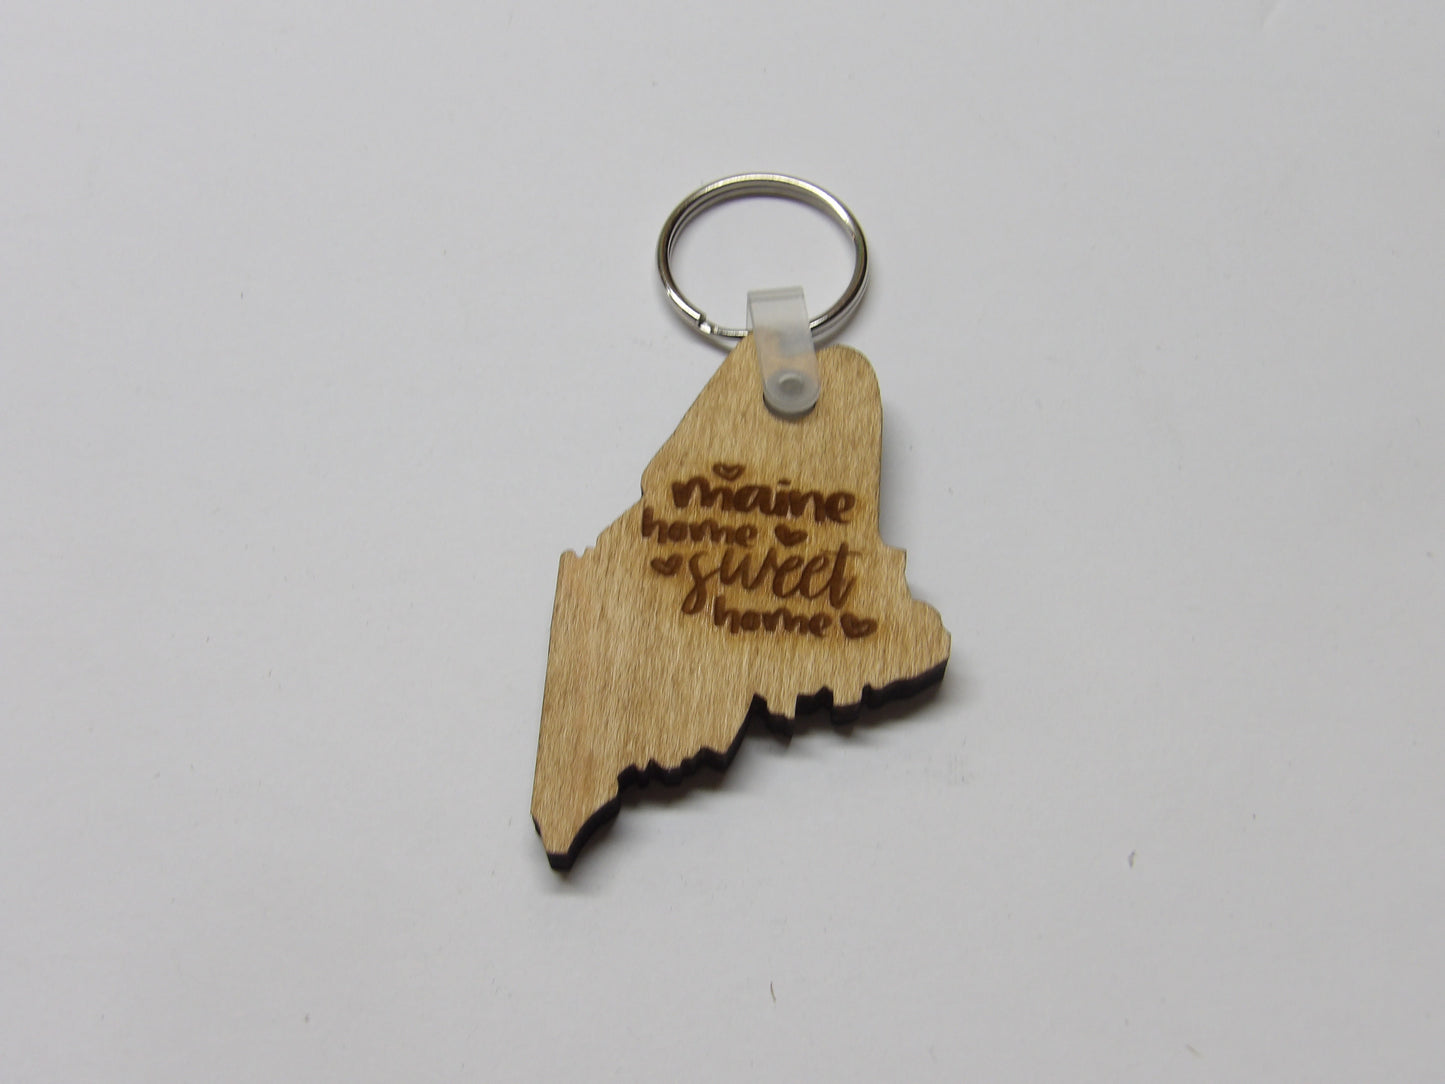 State of Maine Home Sweet Home Keychain